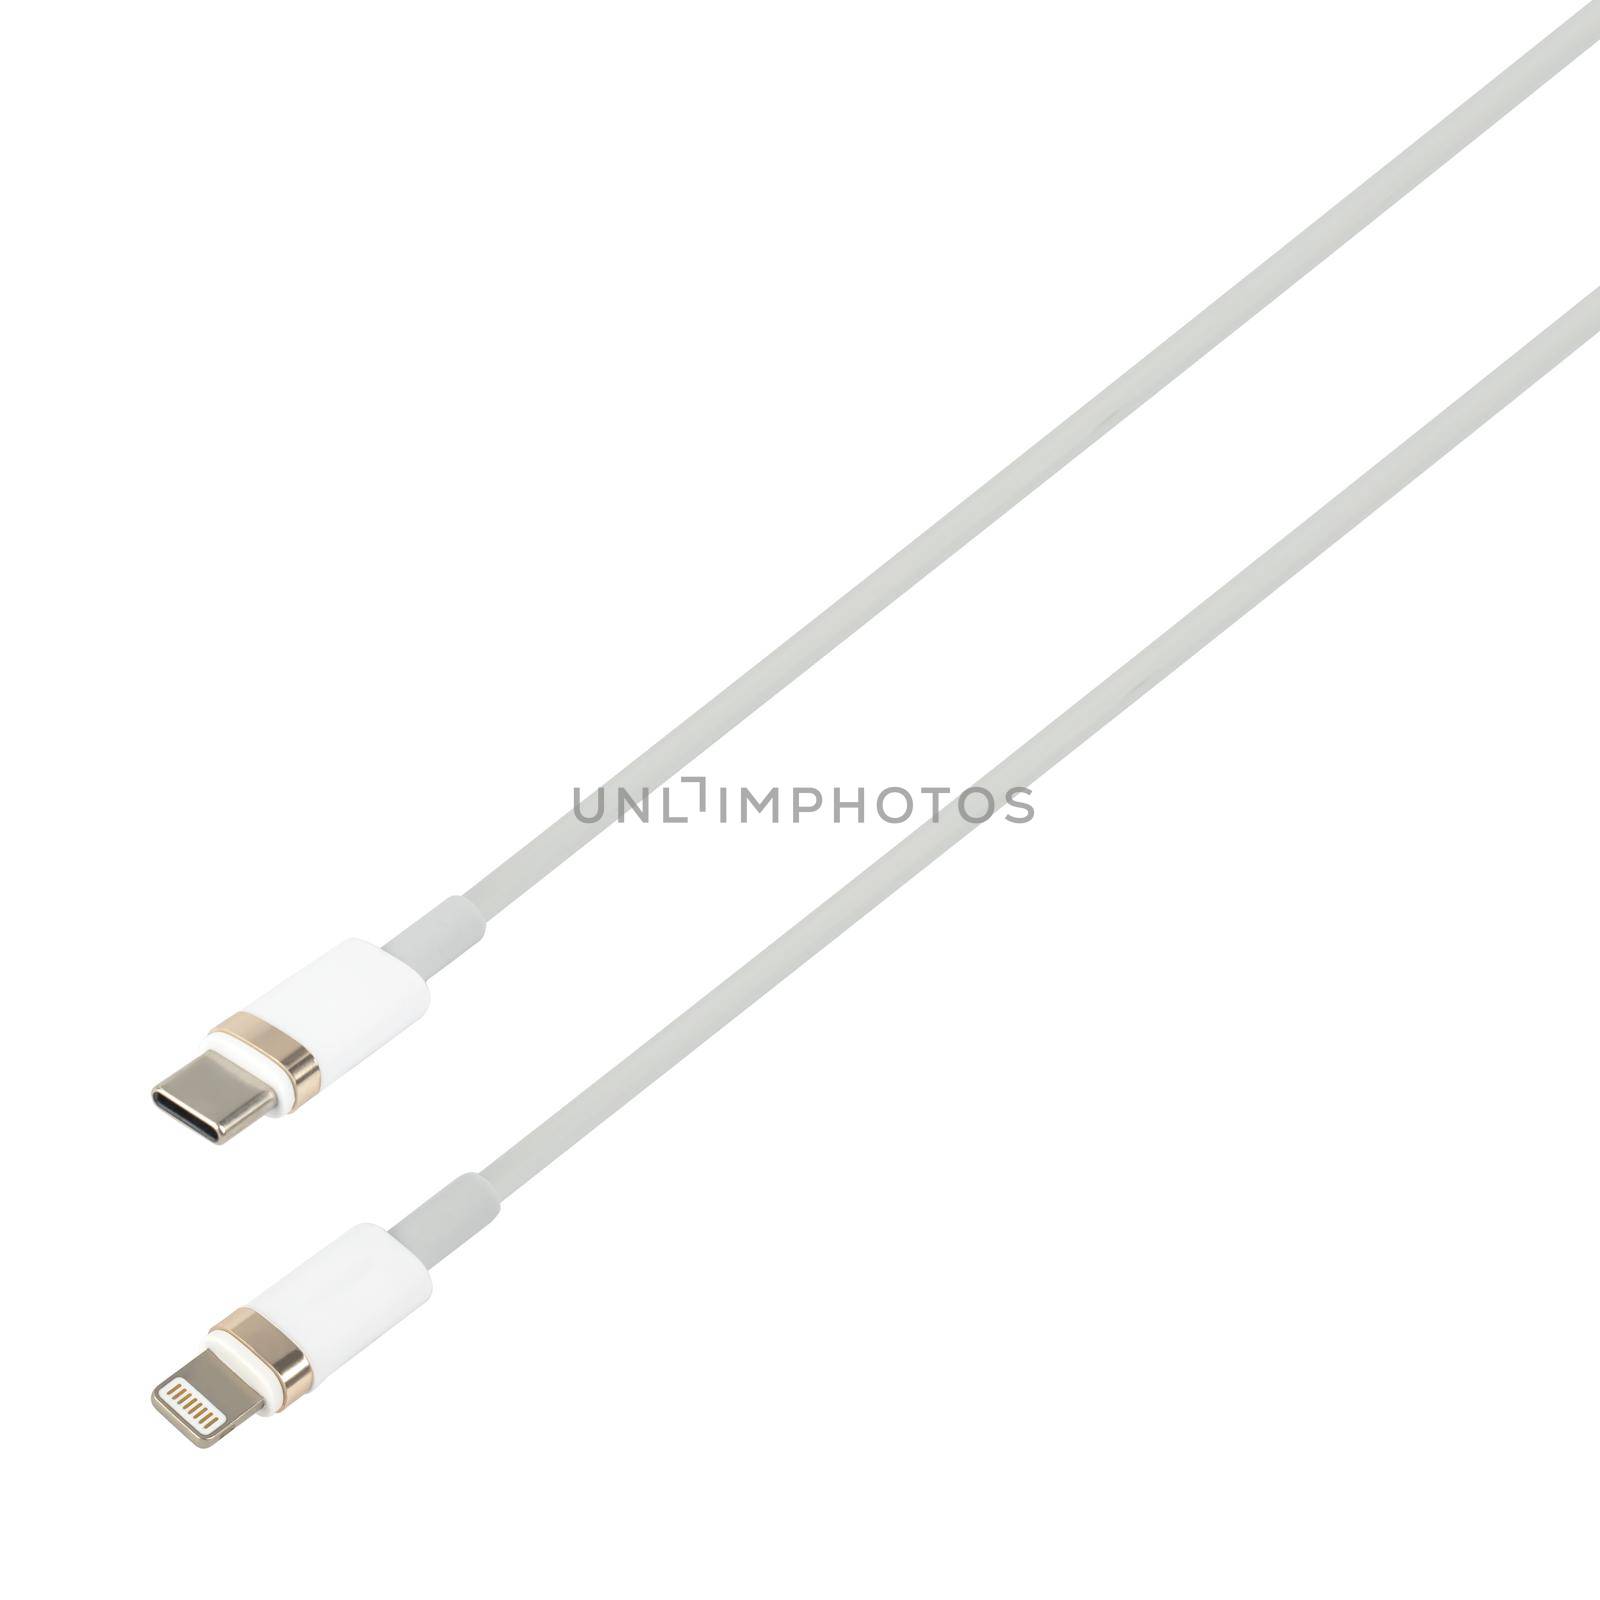 cable with Type-C and Lightning connector, on white background